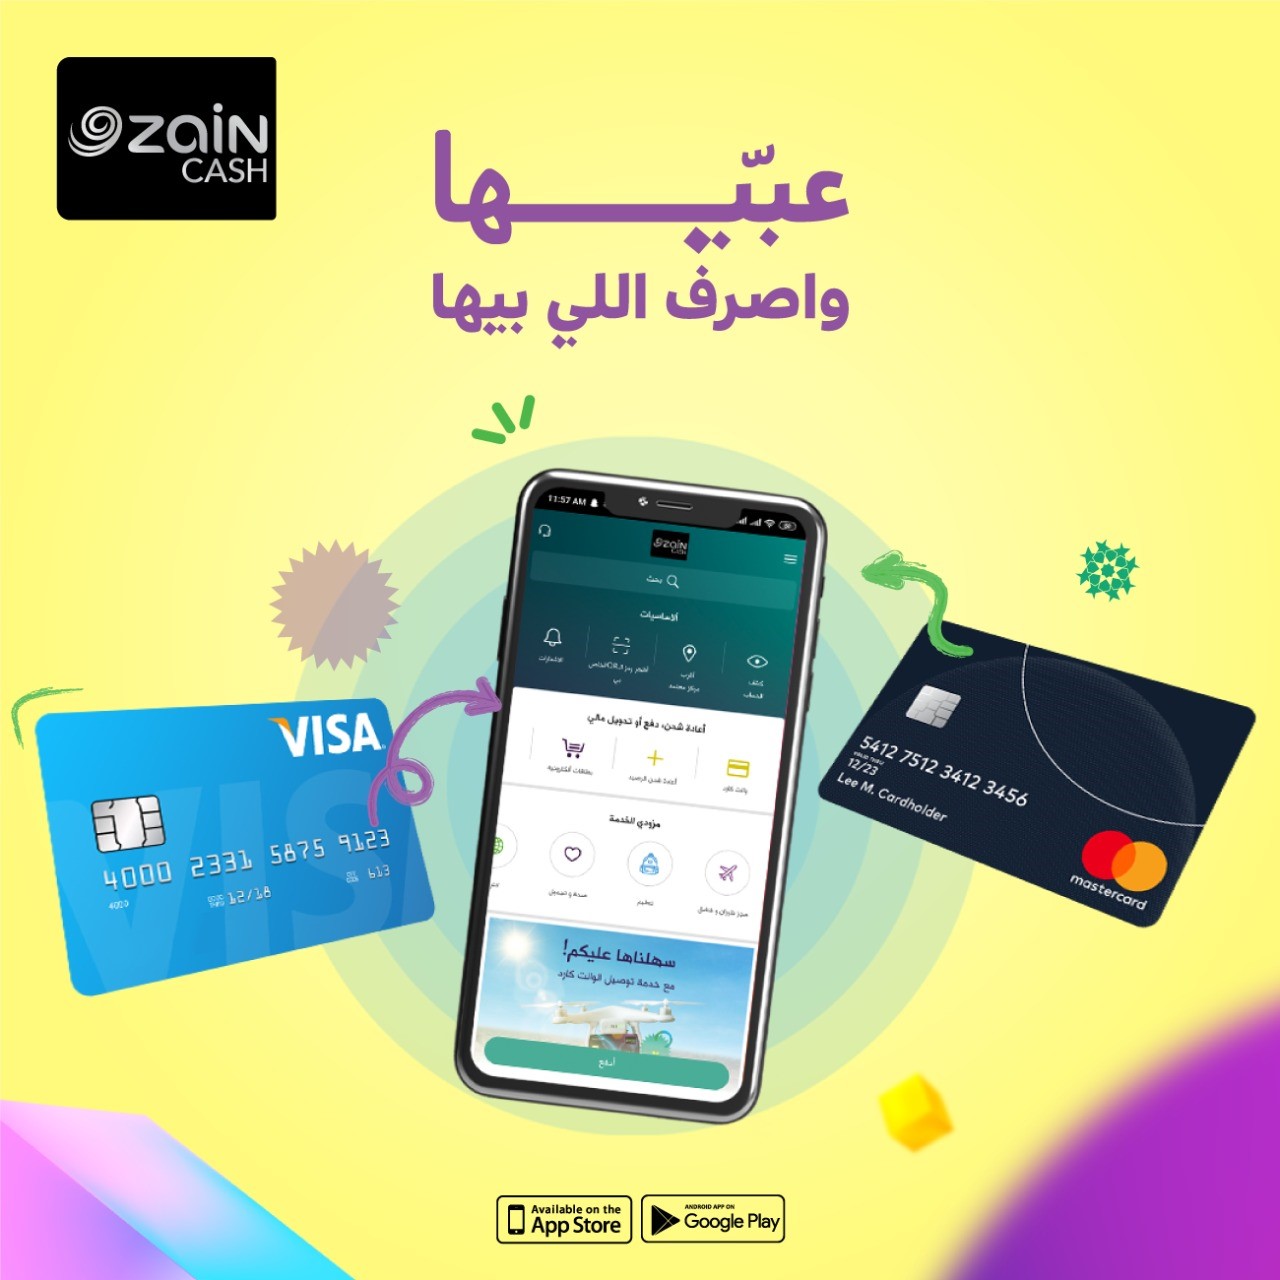 Zain Cash launches the electronic wallet filling service through the two international MasterCard and Visa cards 14142020_7e181cb0-0da8-48c2-b3d4-bcfe550c8068